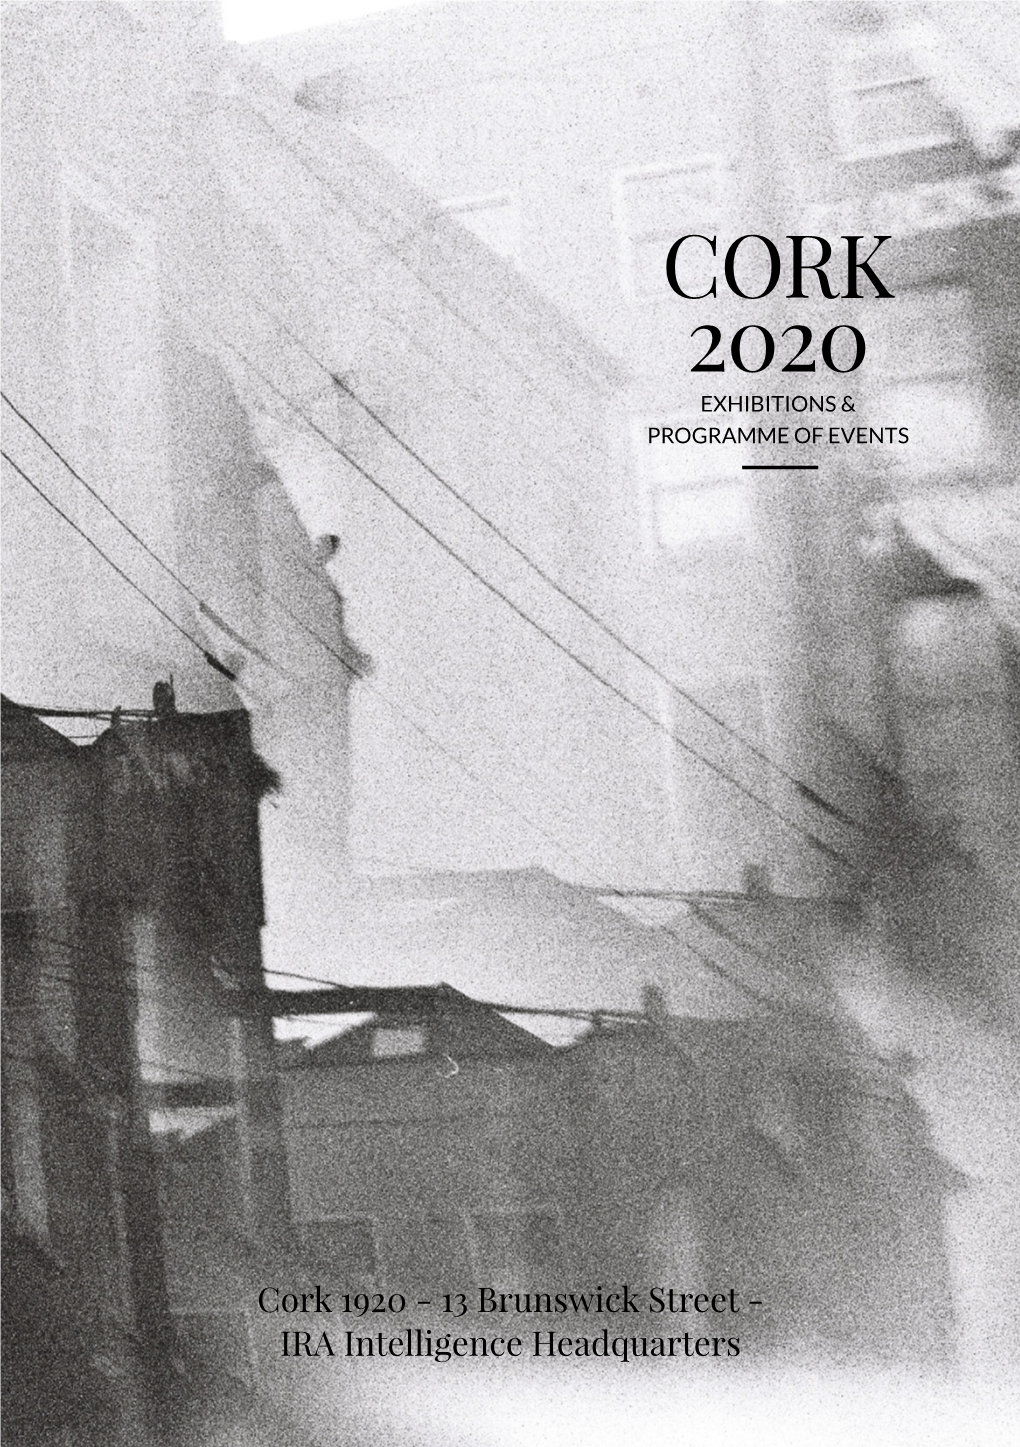 Cork 2020 Exhibitions & Programme of Events